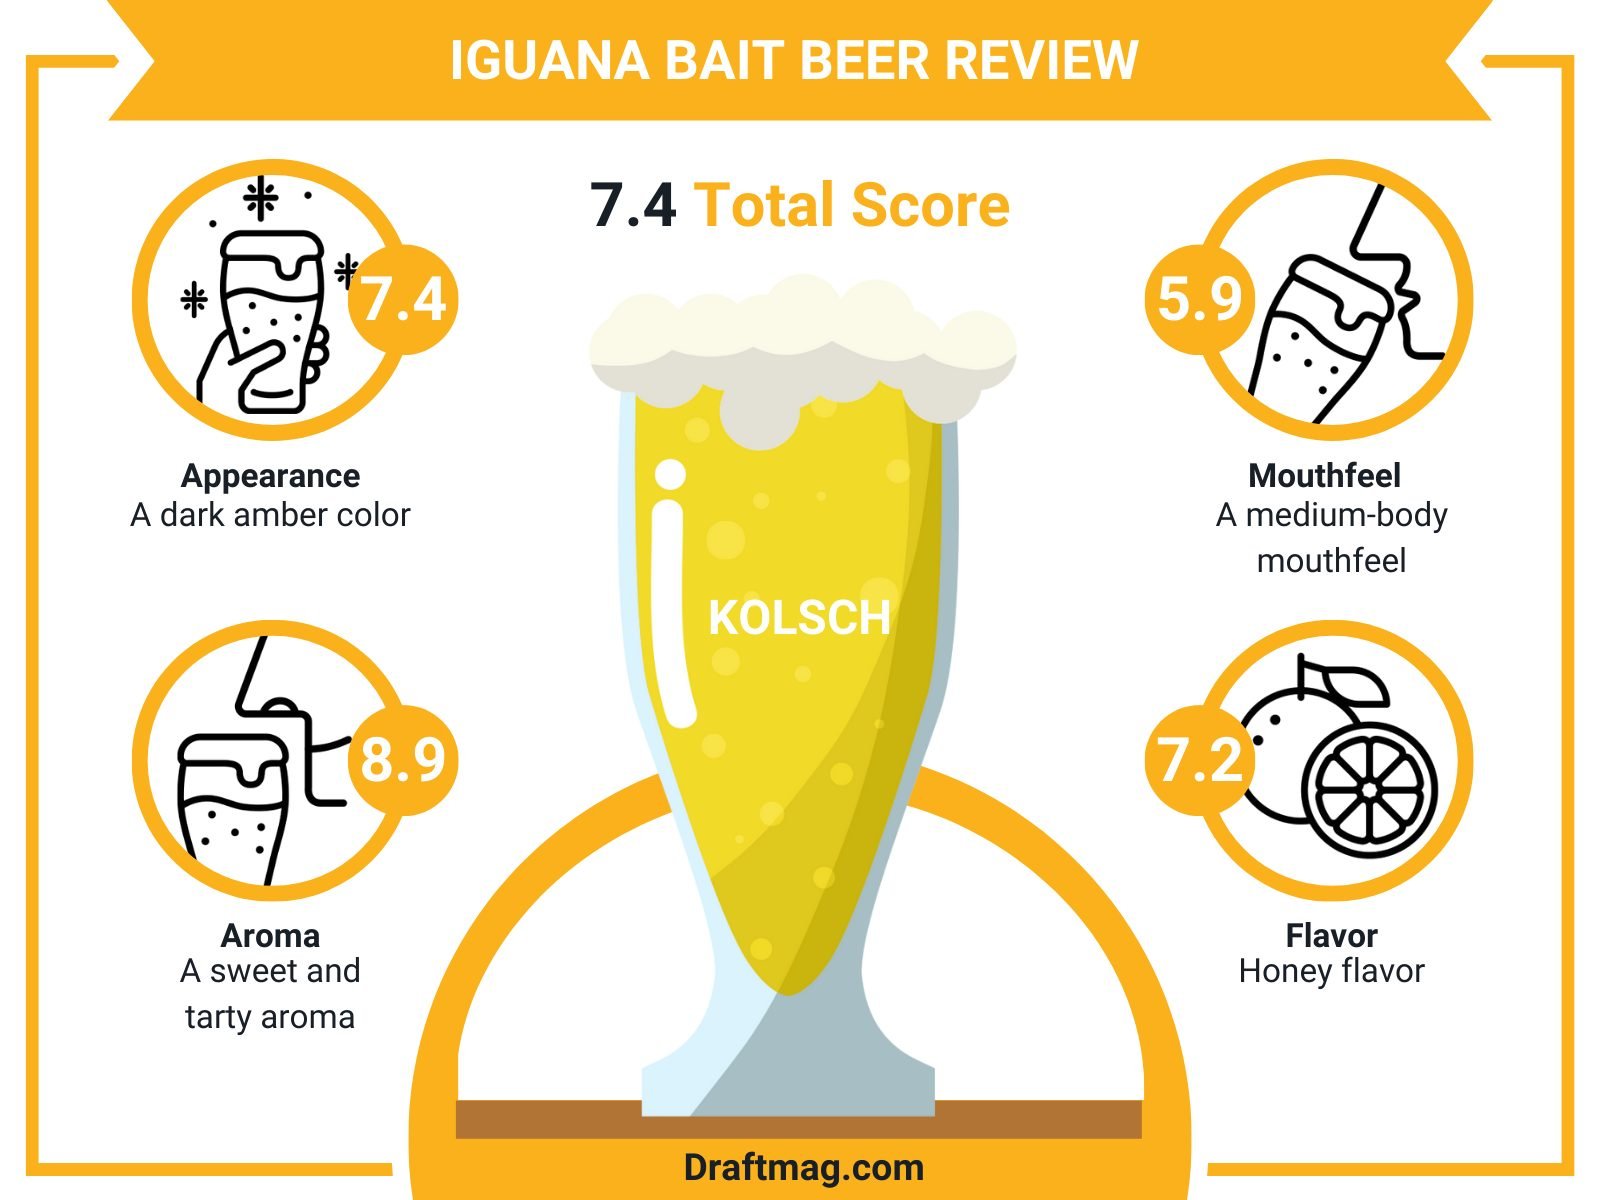 Iguana Bait Beer Review Infographic